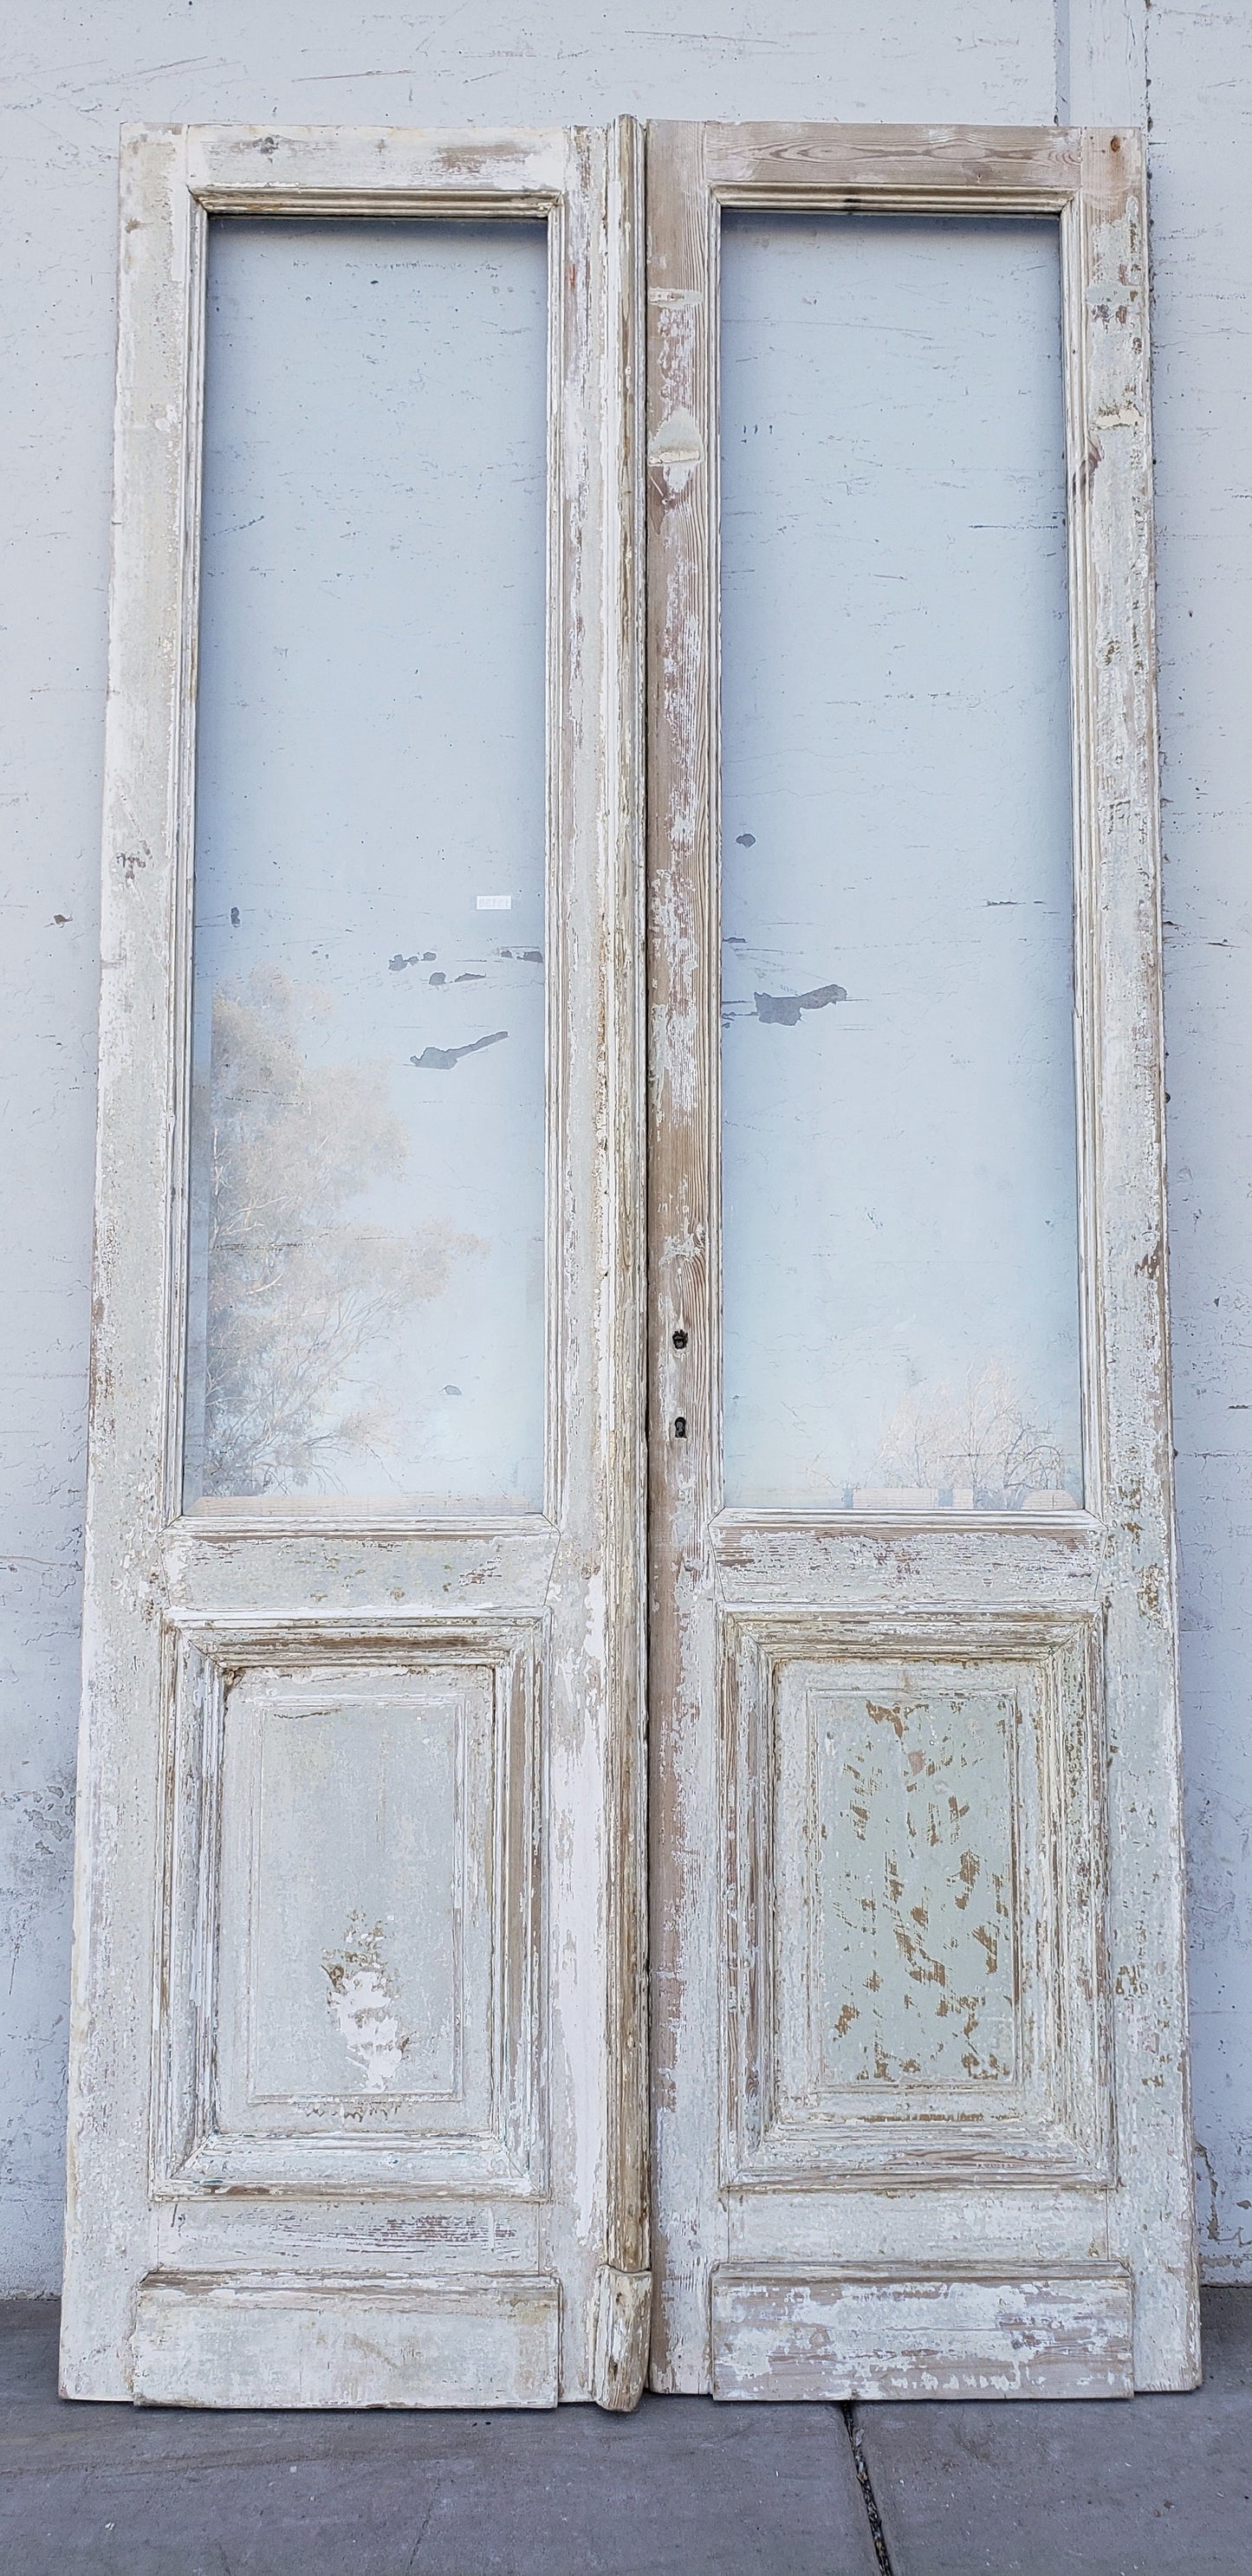 Pair of Washed Wood Single Lite Antique Doors